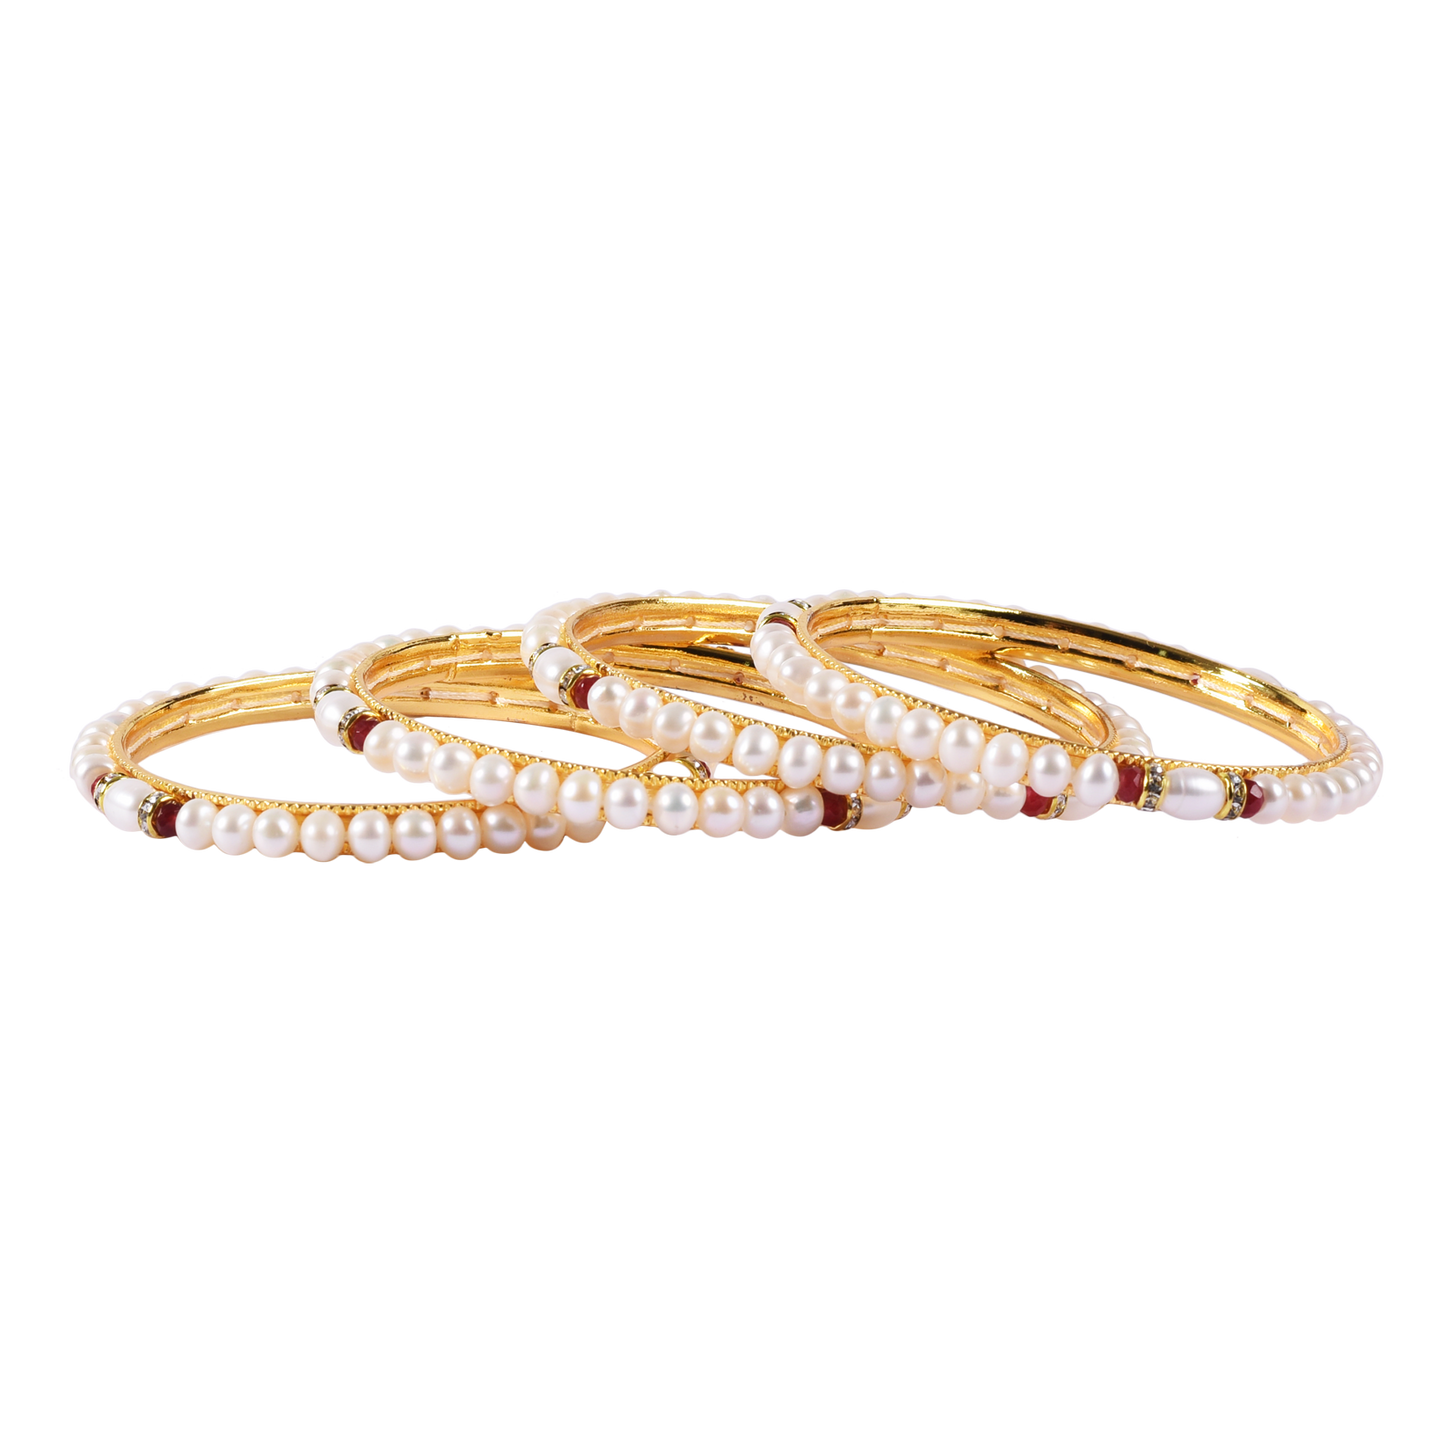 4 Pearl Bangles in Red Tone 